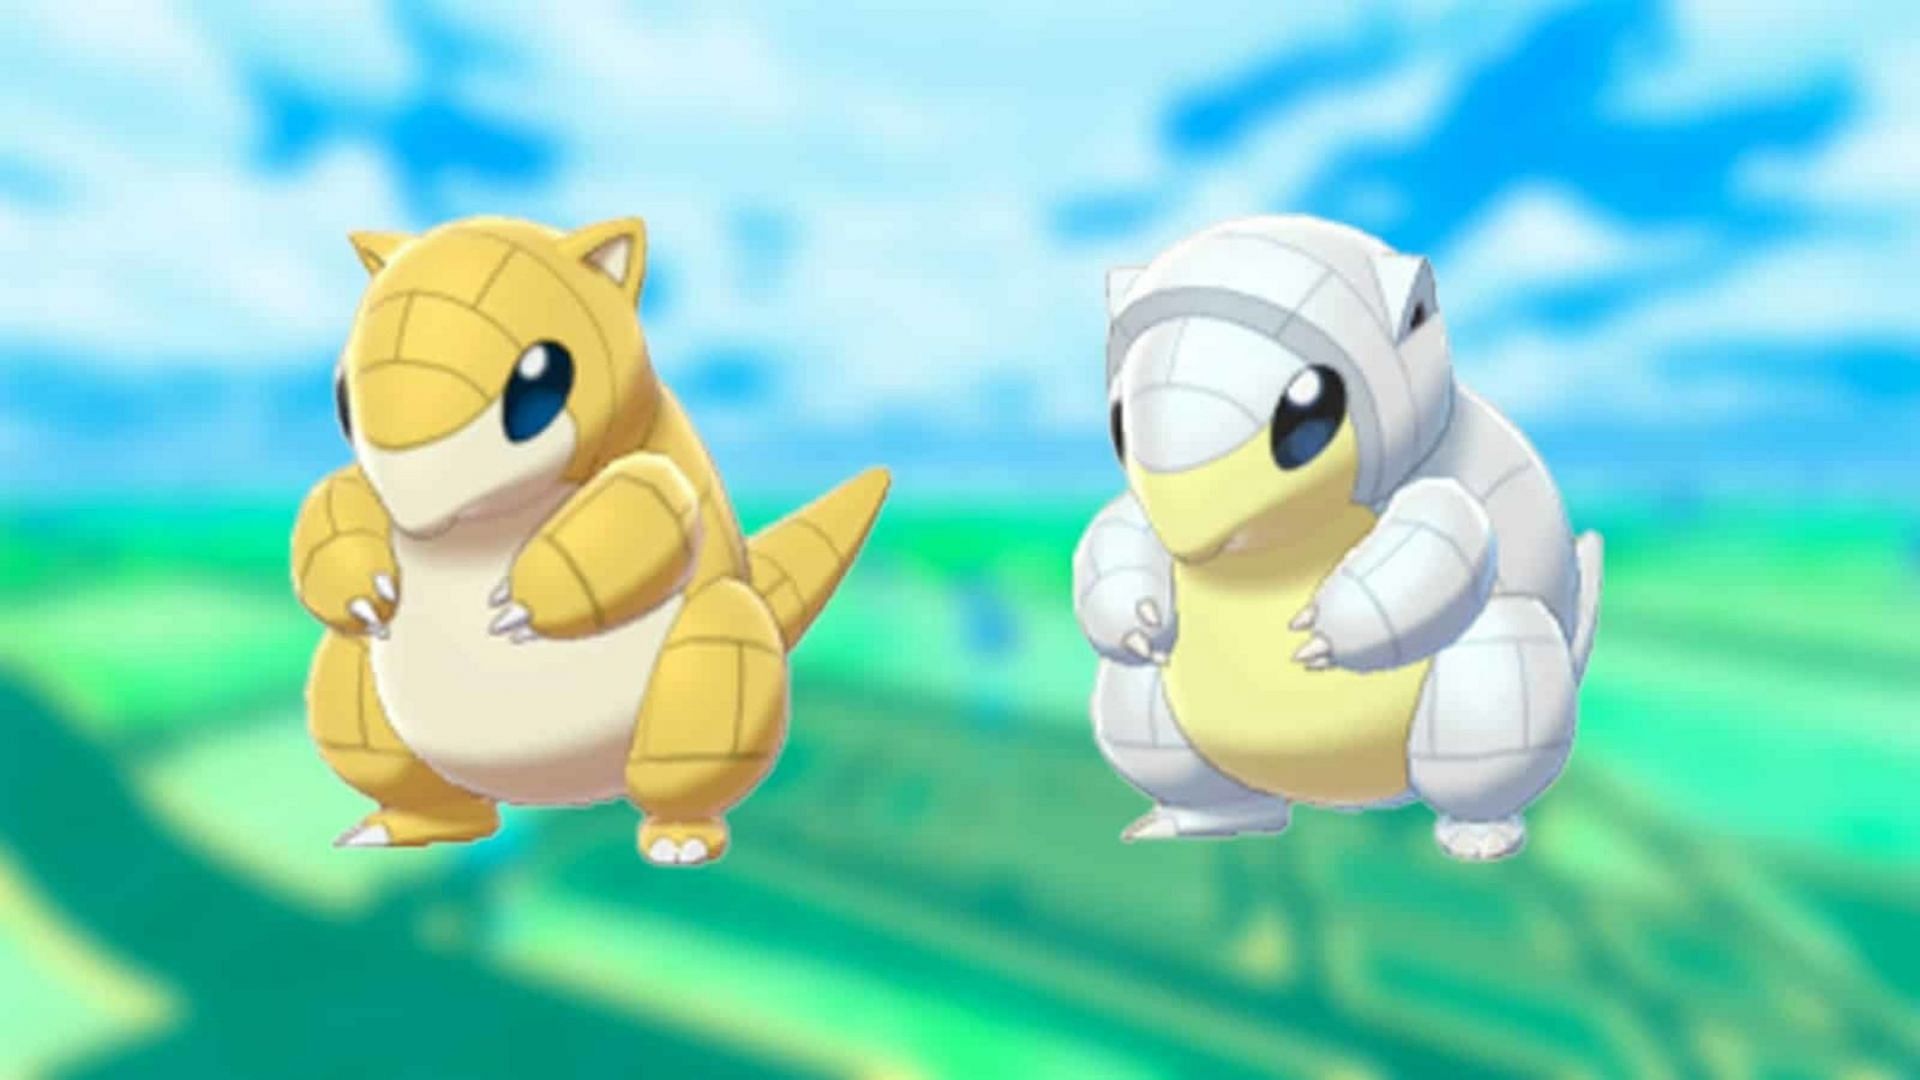 Sandshrew and its Alolan counterpart will both be featured in Pokemon GO&#039;s next Community Day (Image via Niantic)